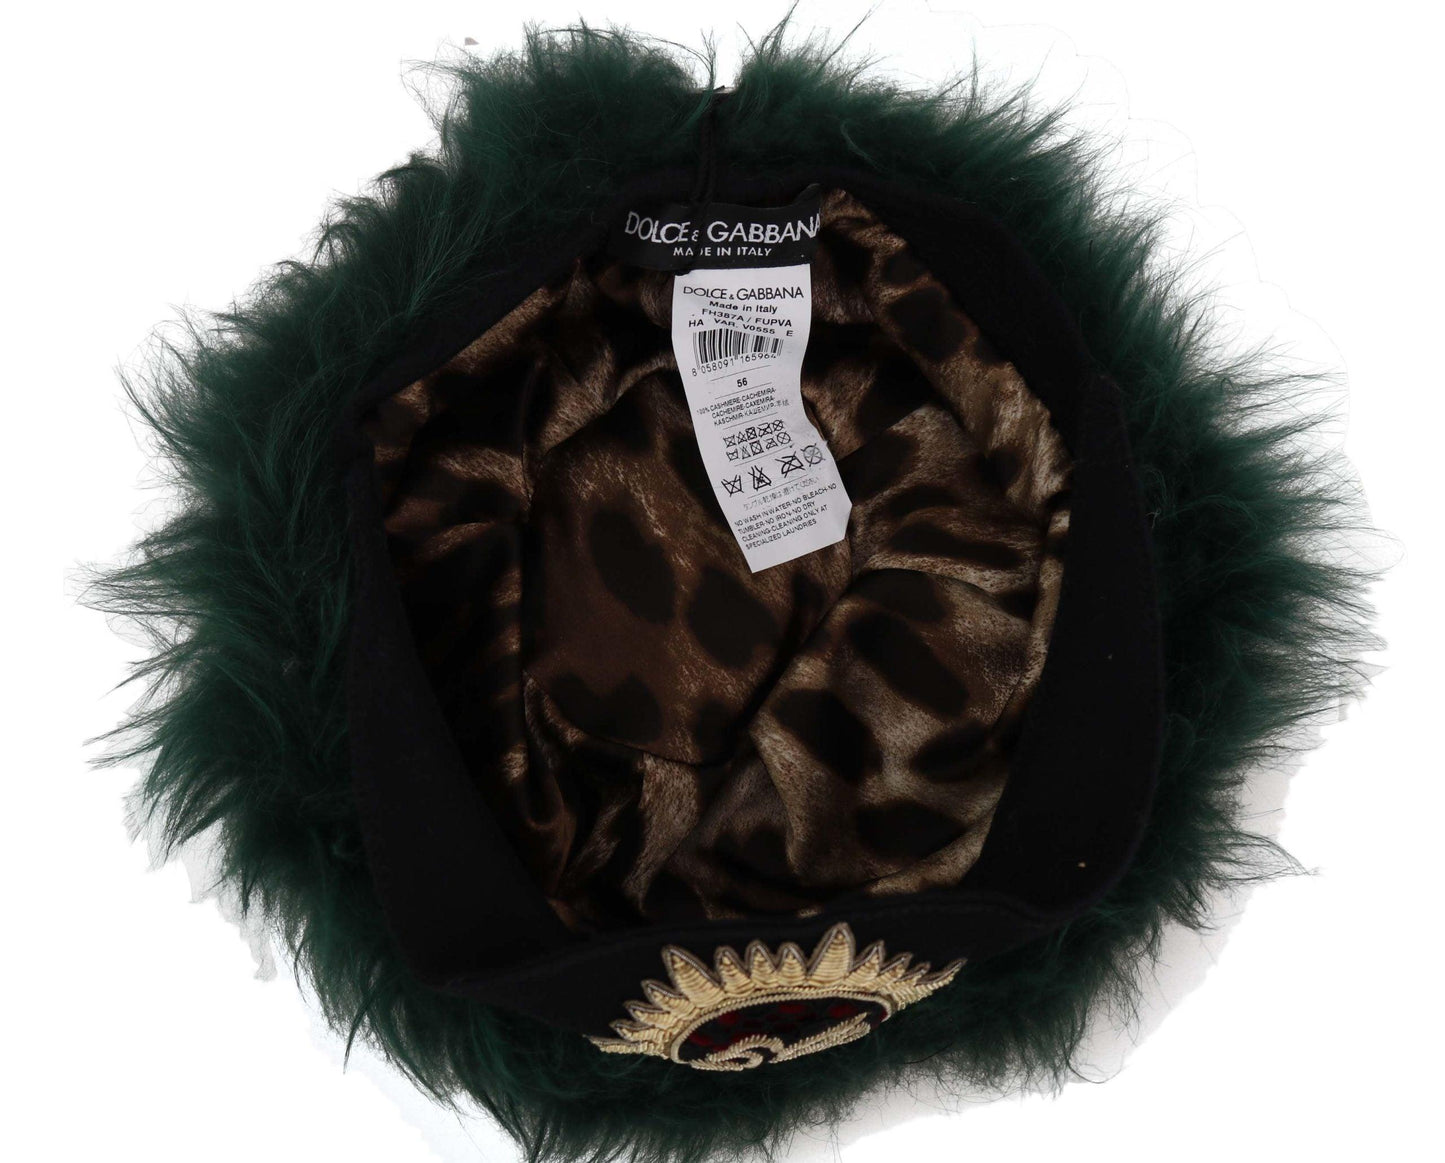 Green Fur DG Logo Embroidered Cloche Hat - Designed by Dolce & Gabbana Available to Buy at a Discounted Price on Moon Behind The Hill Online Designer Discount Store